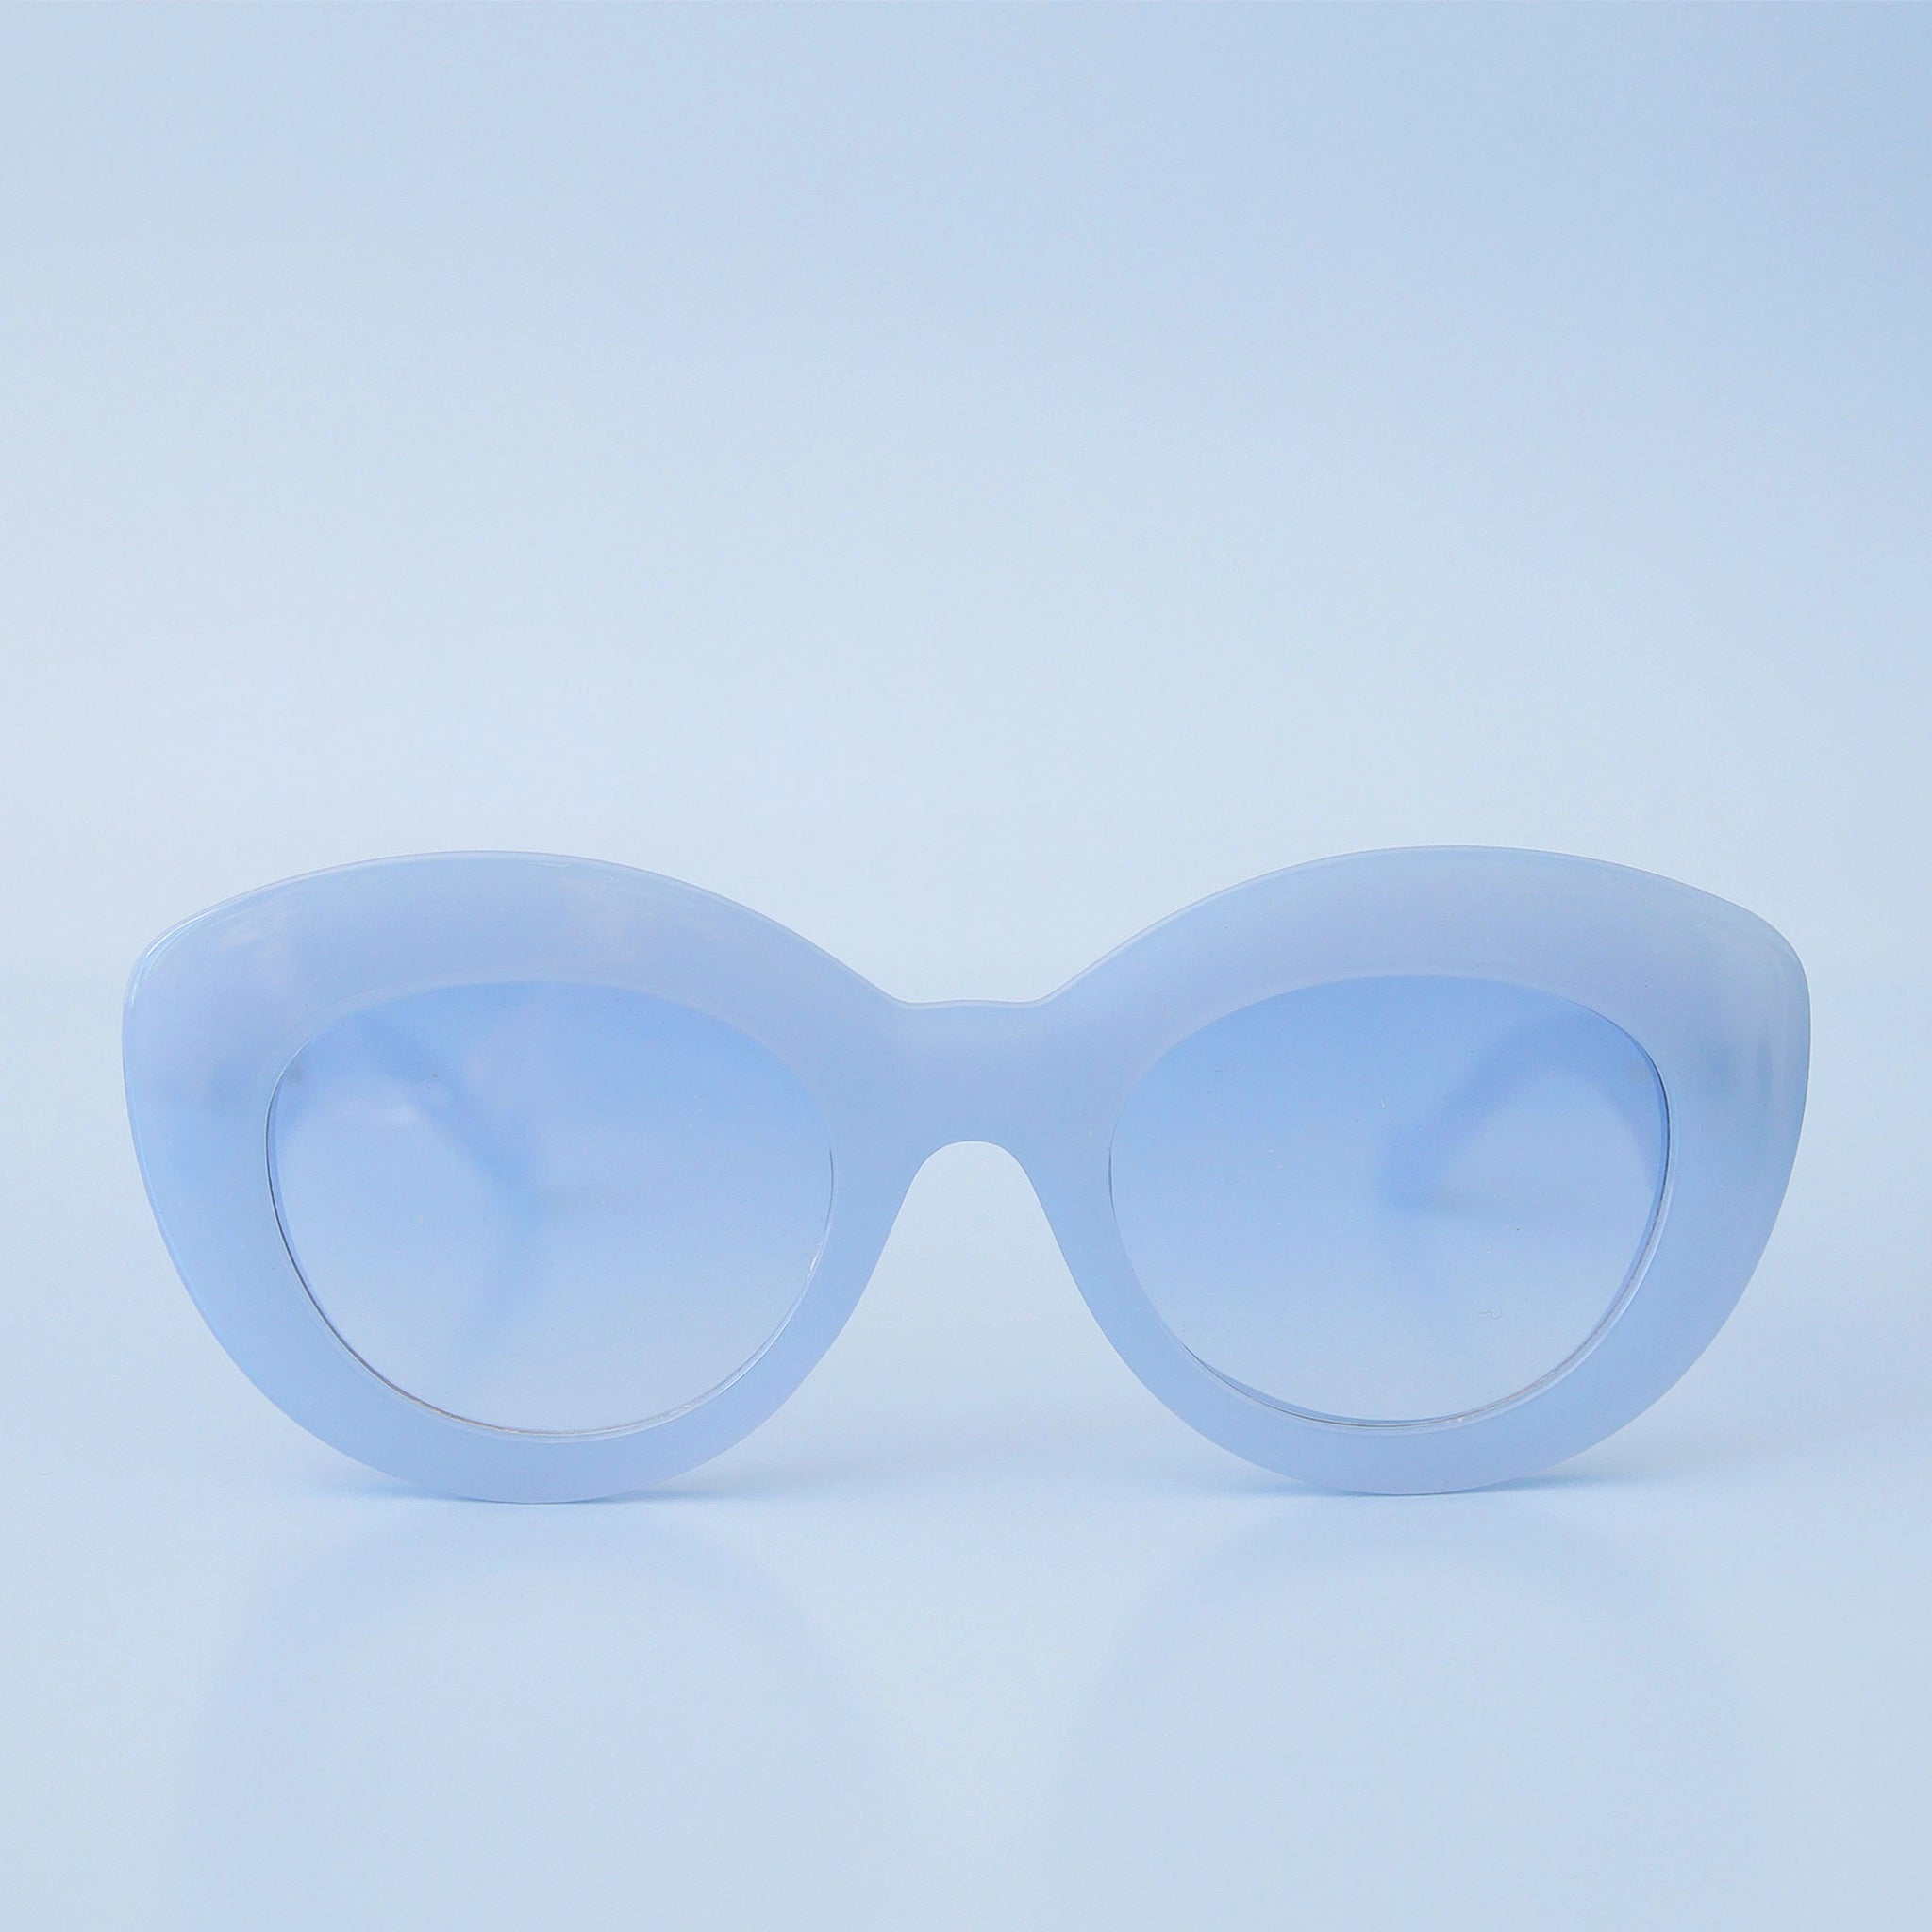 On a blue background is a model wearing the Gemma Sunglasses in the shade Lapis.